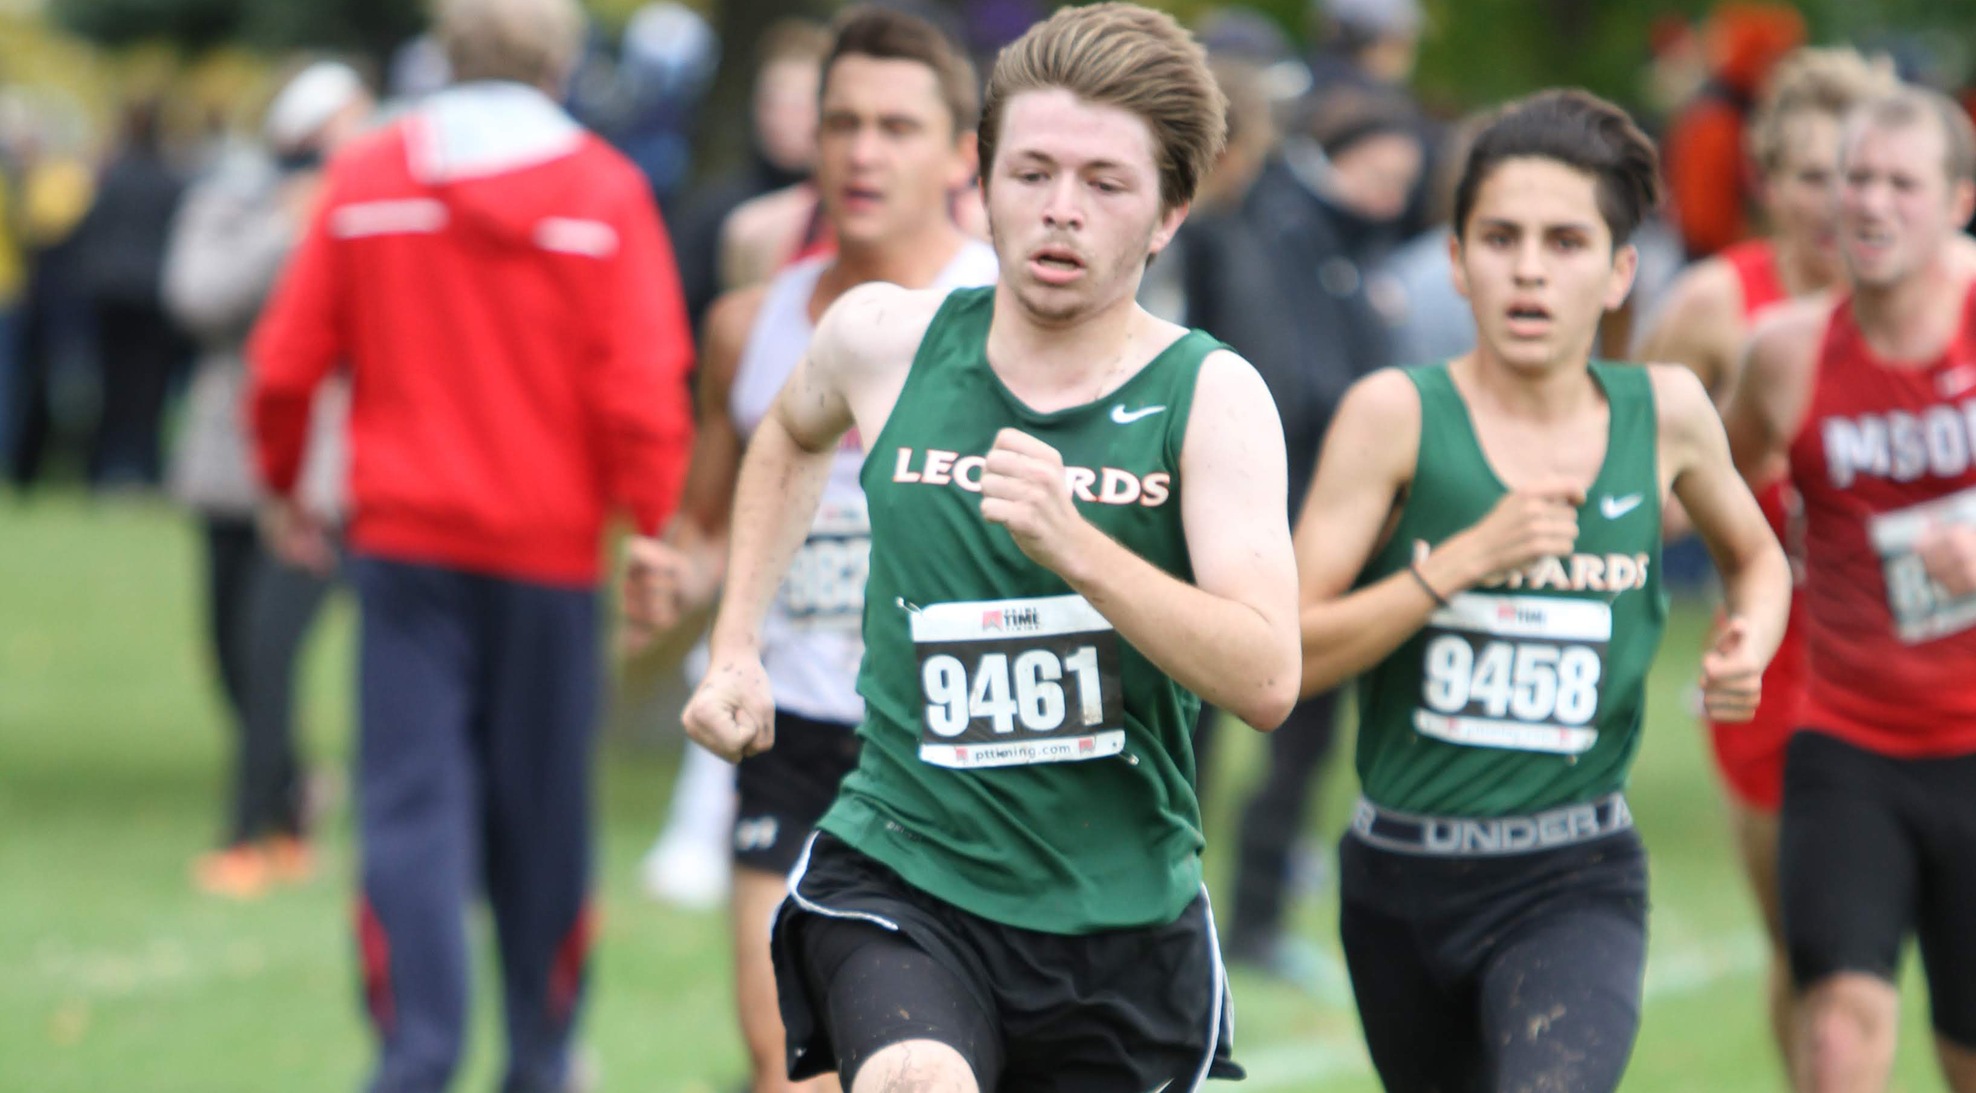 MXC Competes Against Top DIII Cross Country Programs